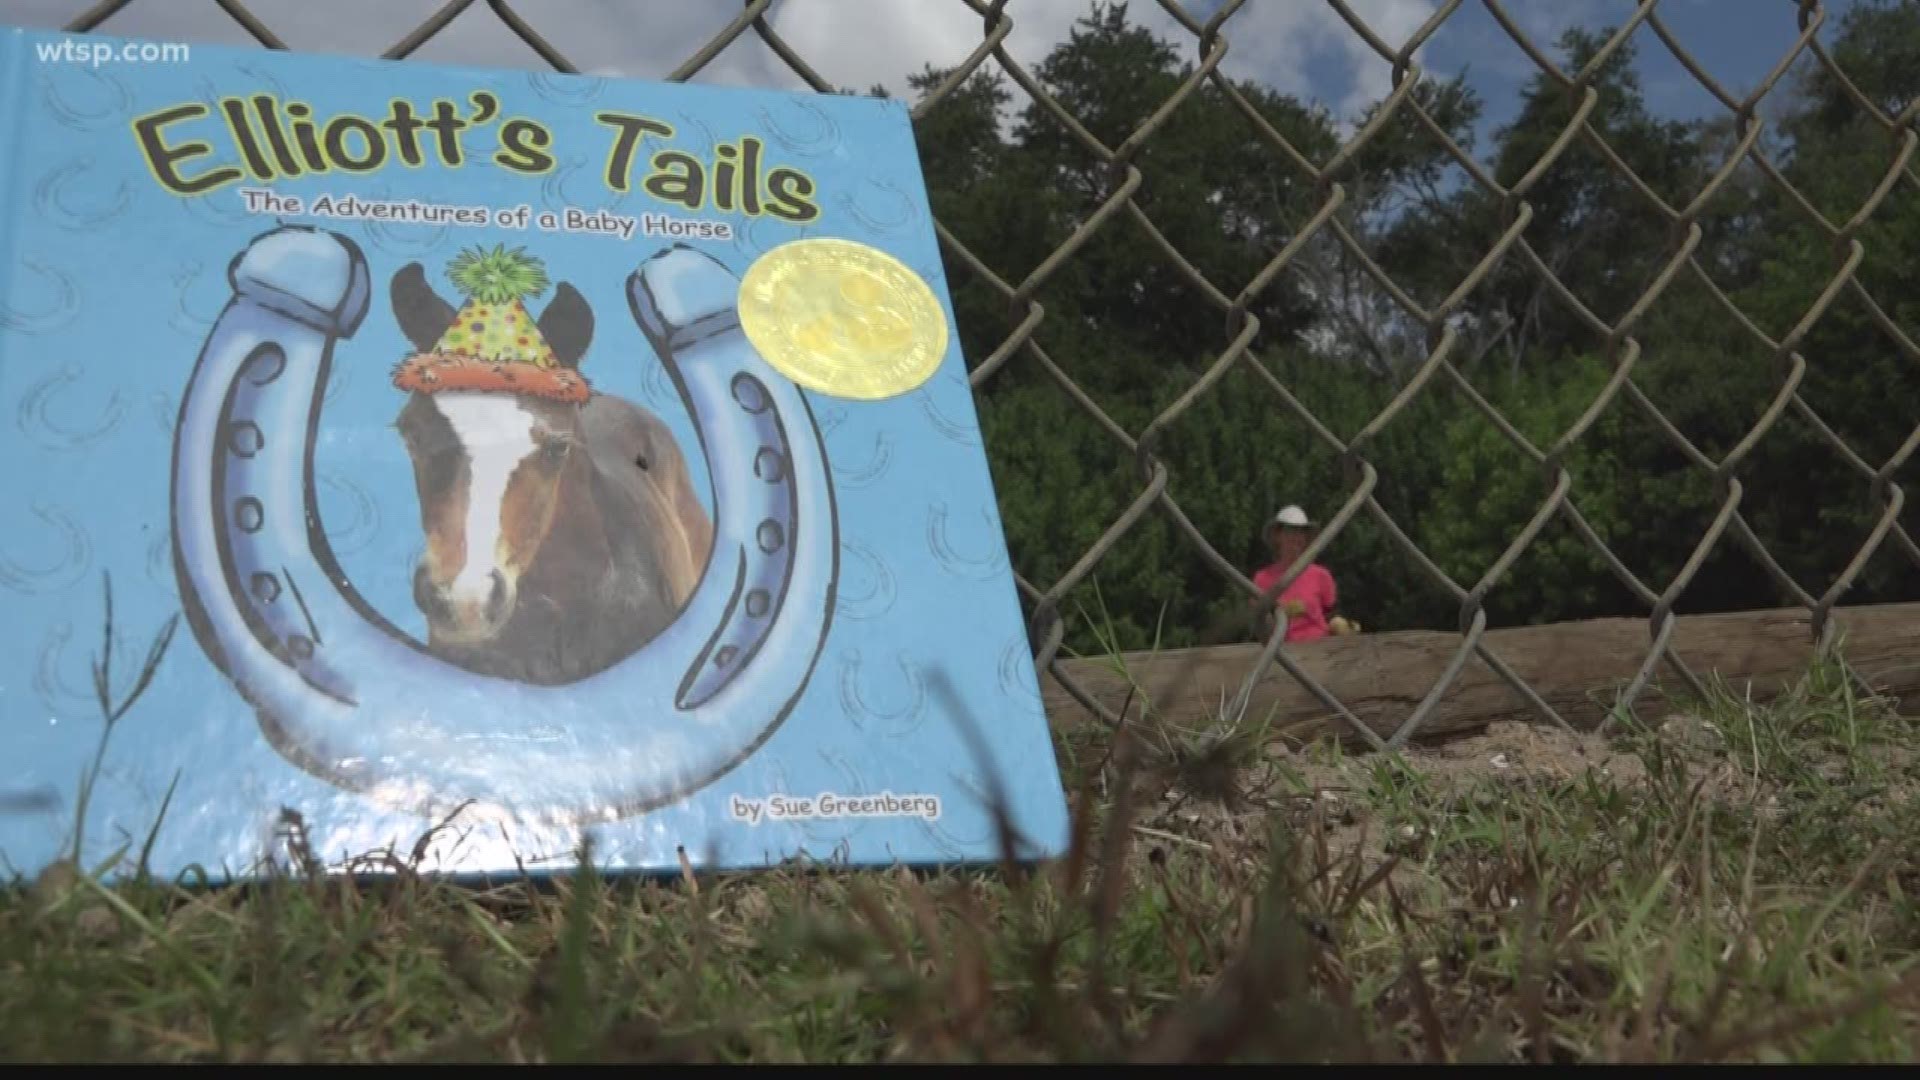 A pediatric nurse for years, Sue Greenberg had an idea one day while watching her horse parade around her stable.

“I just started to work with all the little kids with 4-H group,” she said. “I just thought it would be really cute to have a book for kids.”

She penned "Elliott’s Tails, The Adventures of a Baby Horse," a play on words with "tales," to encourage children. The book includes photographs of the actual horse paired with colorful illustrations. Greenberg wrote it and self-published.